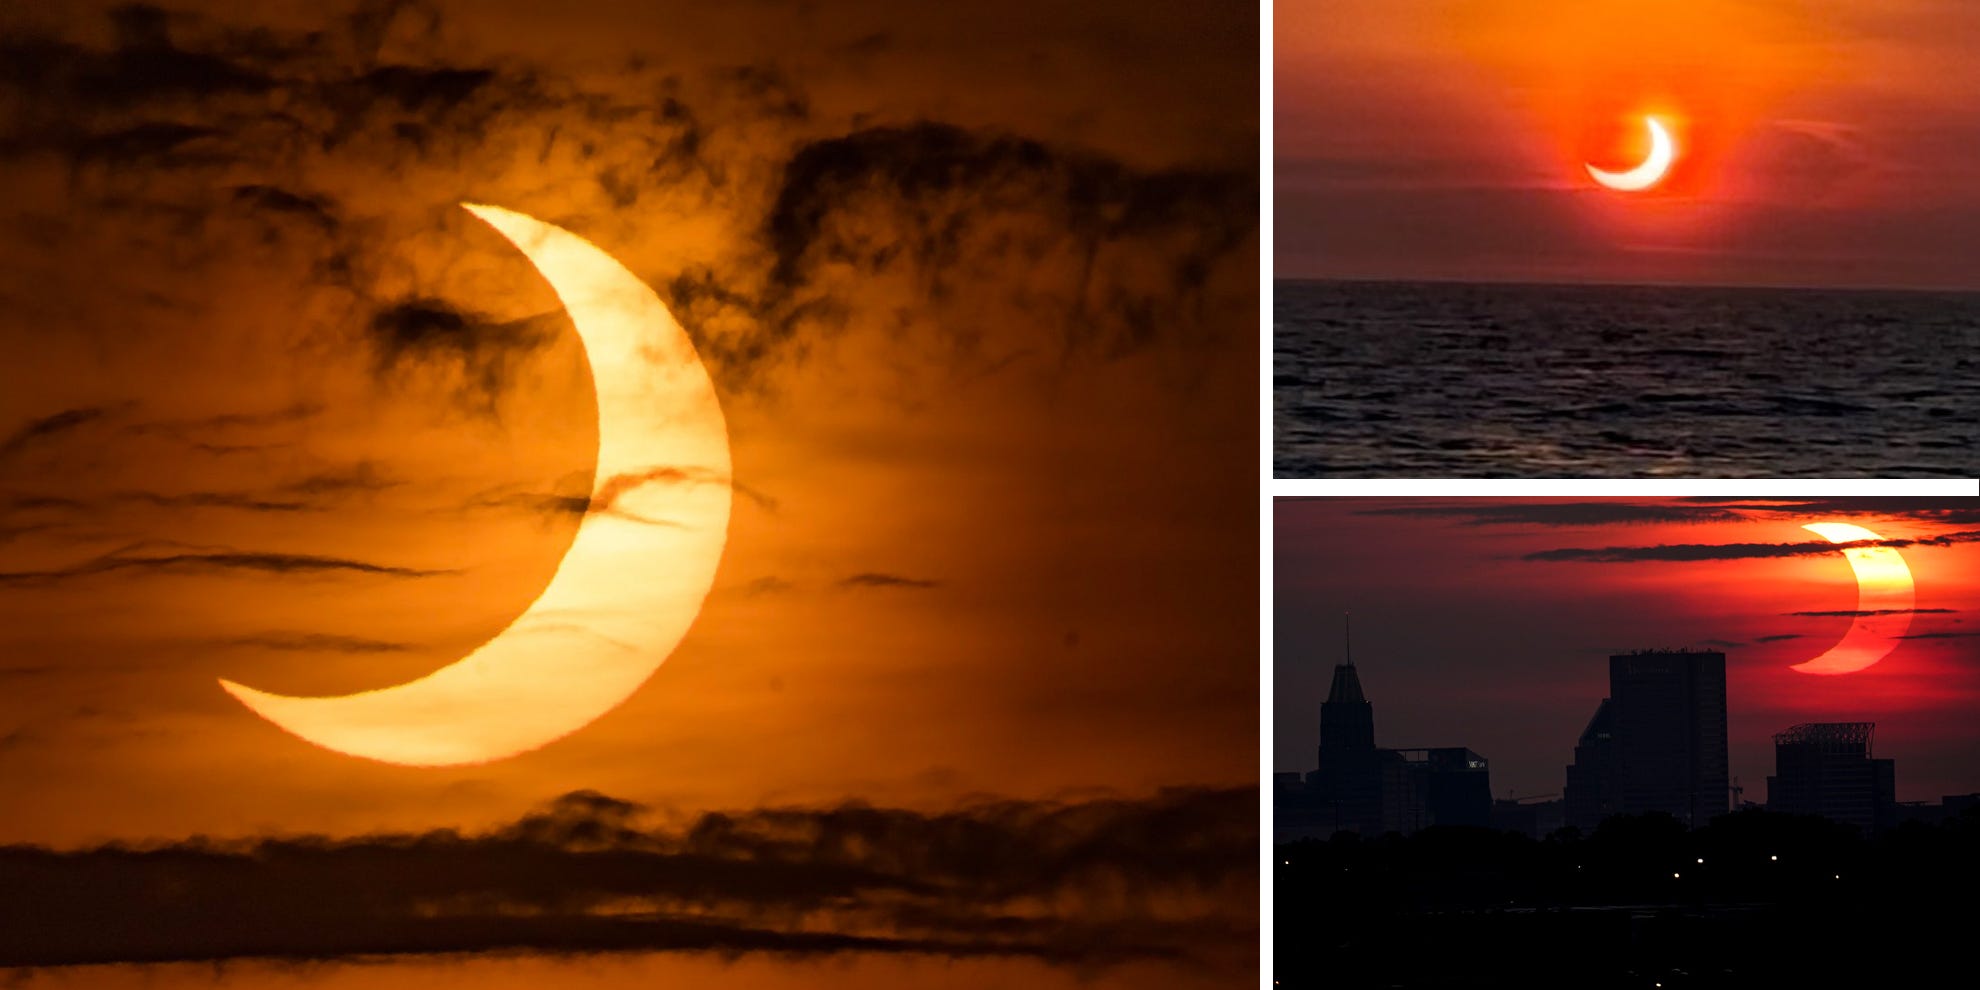 Stunning images show the rare solar eclipse that just partially